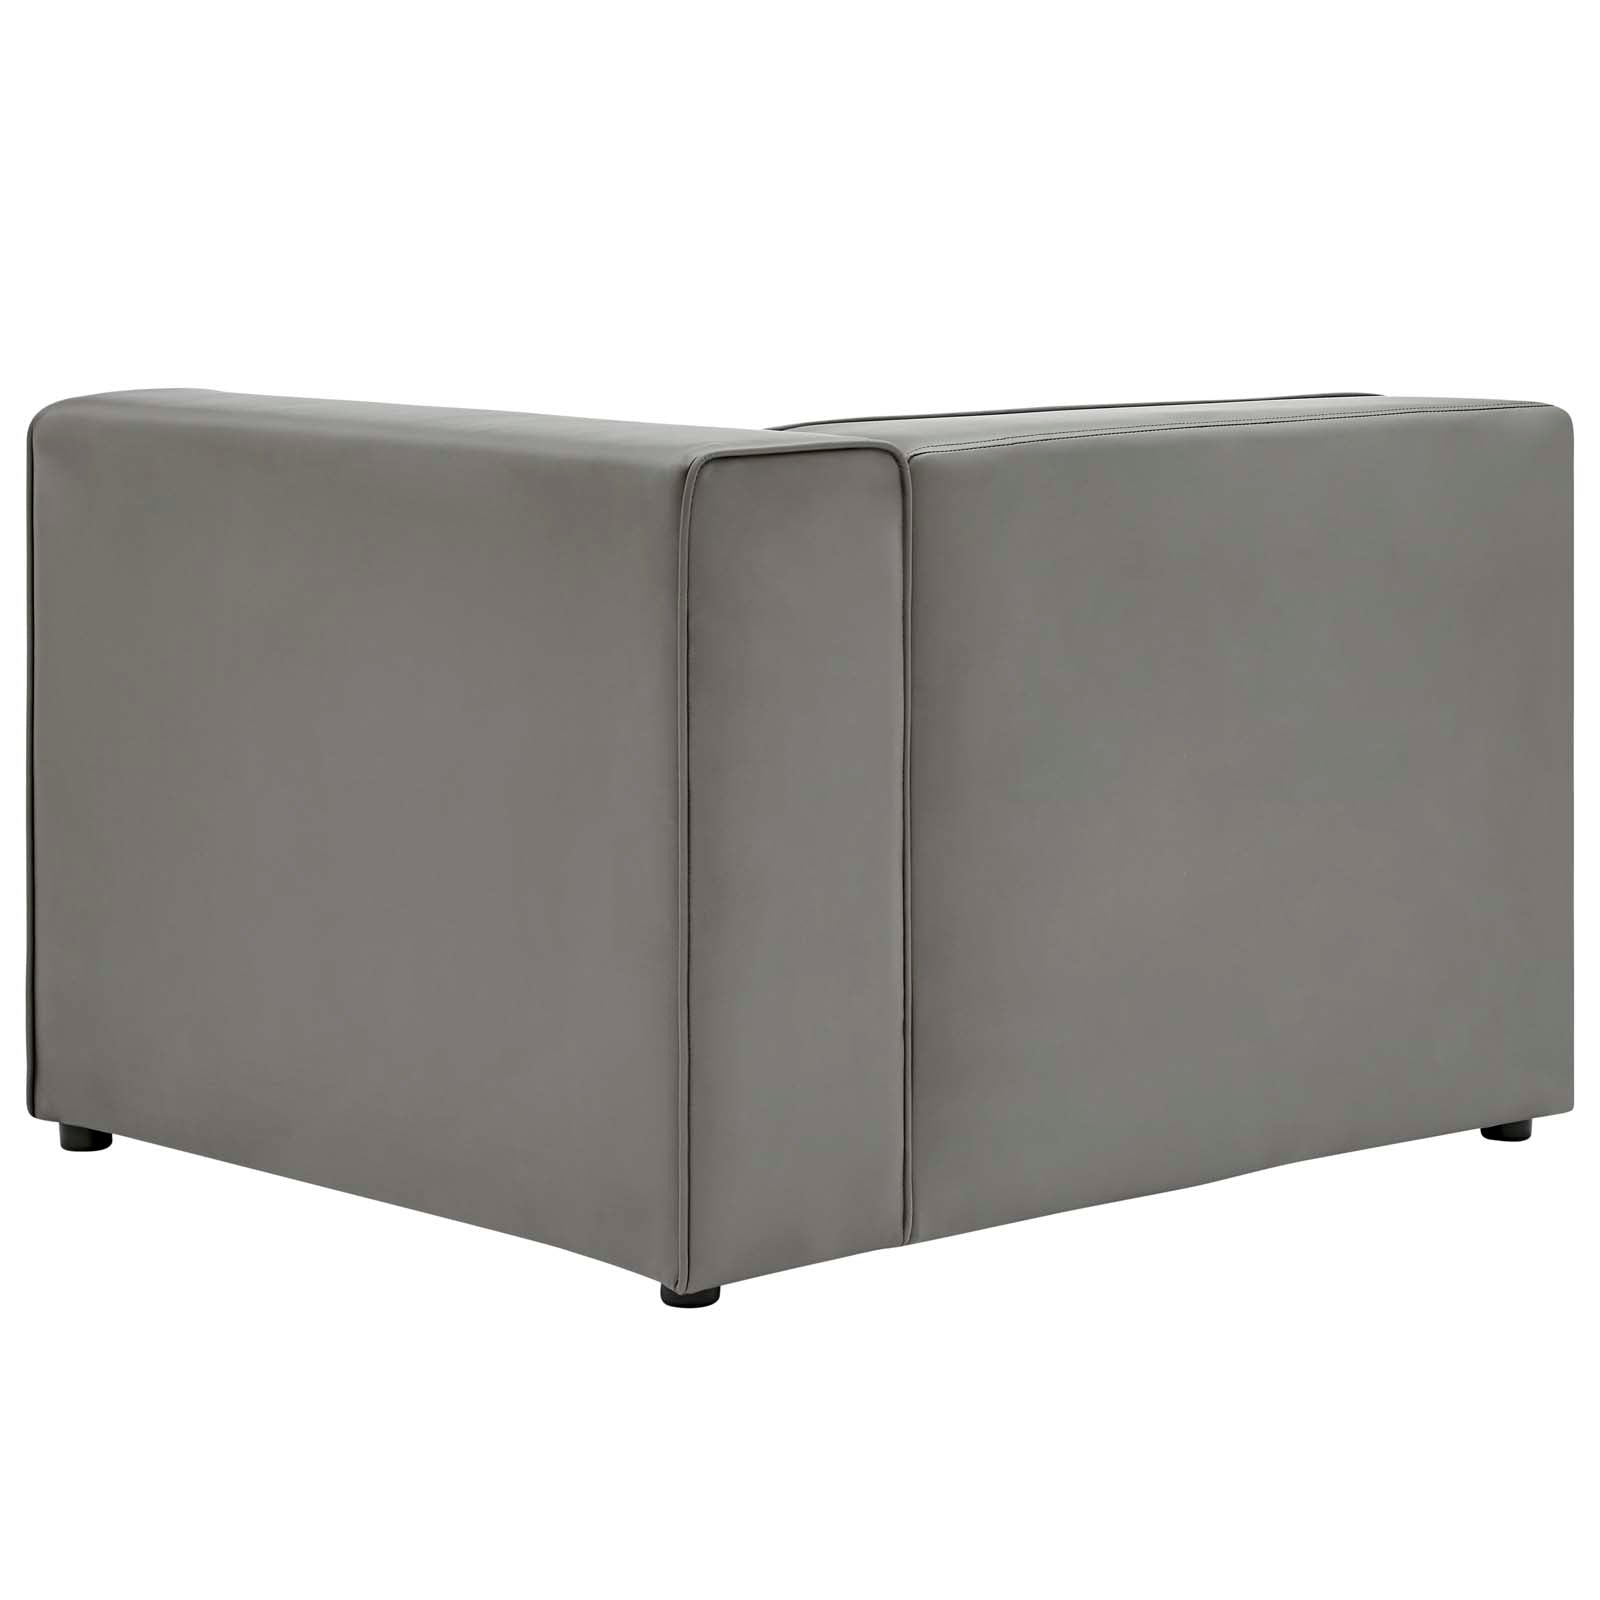 Modway Accent Chairs - Mingle Vegan Leather Right-Arm Chair Gray